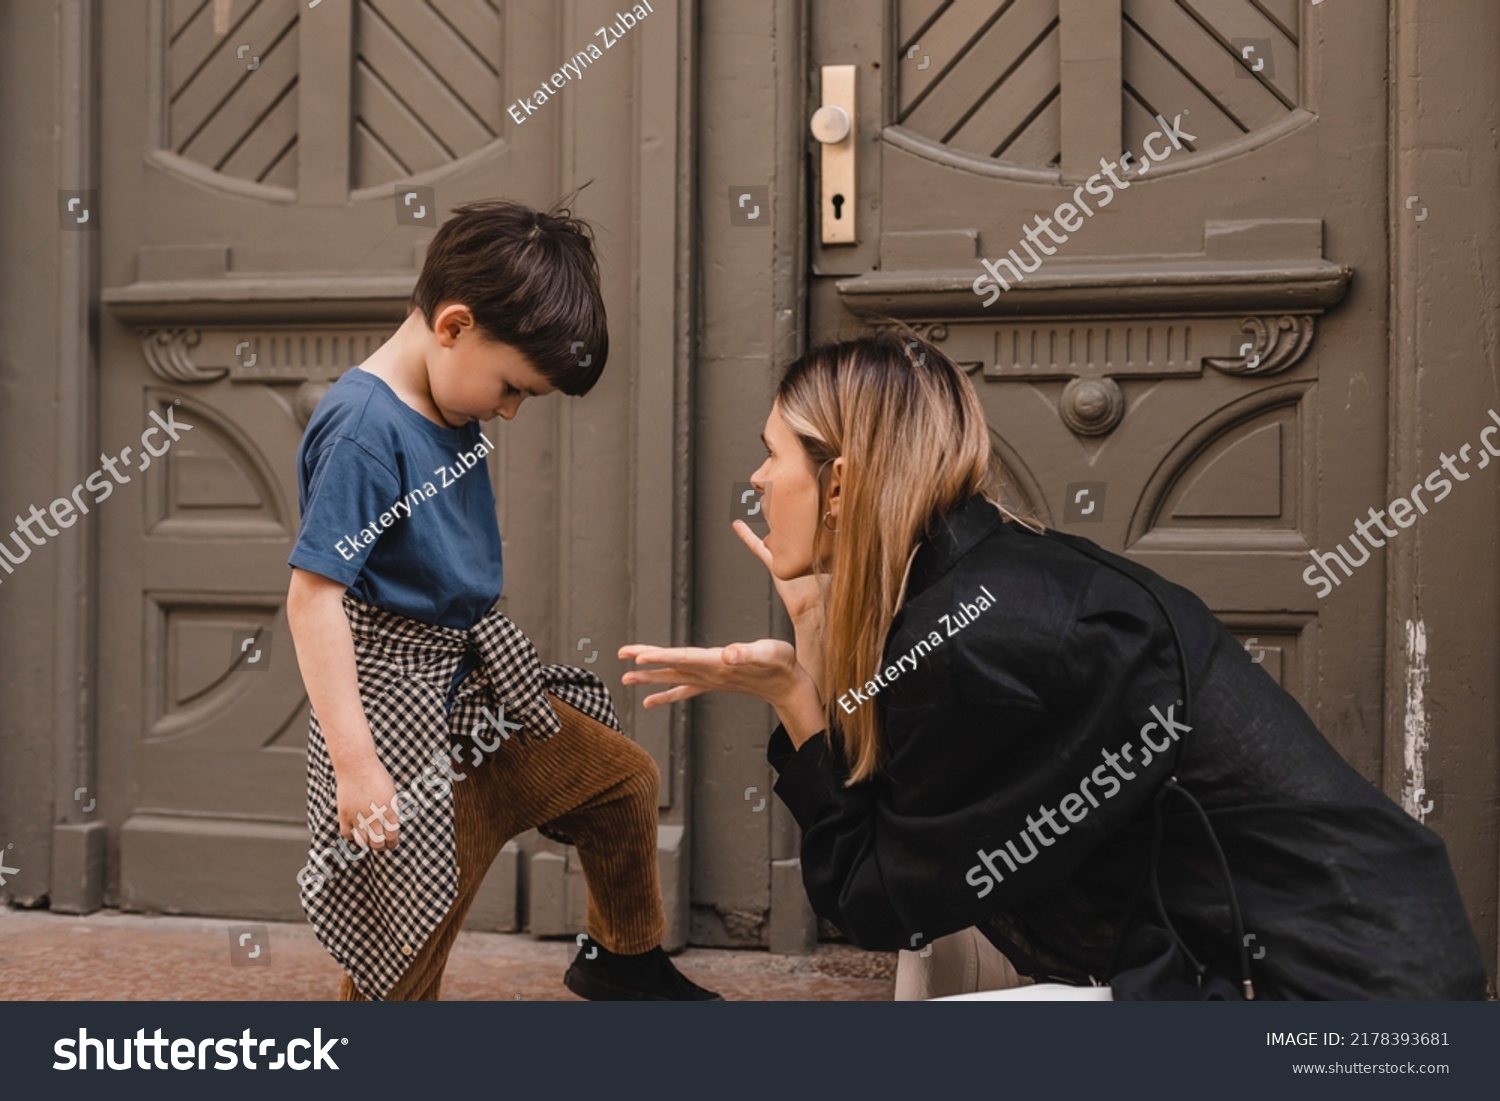 Mother scolds her son on the street. A child cries, a woman shakes her finger because of the boy bad behavior, while walking to home. Rule of conduct. Woman sitting, boy cover his face and cry. #2178393681